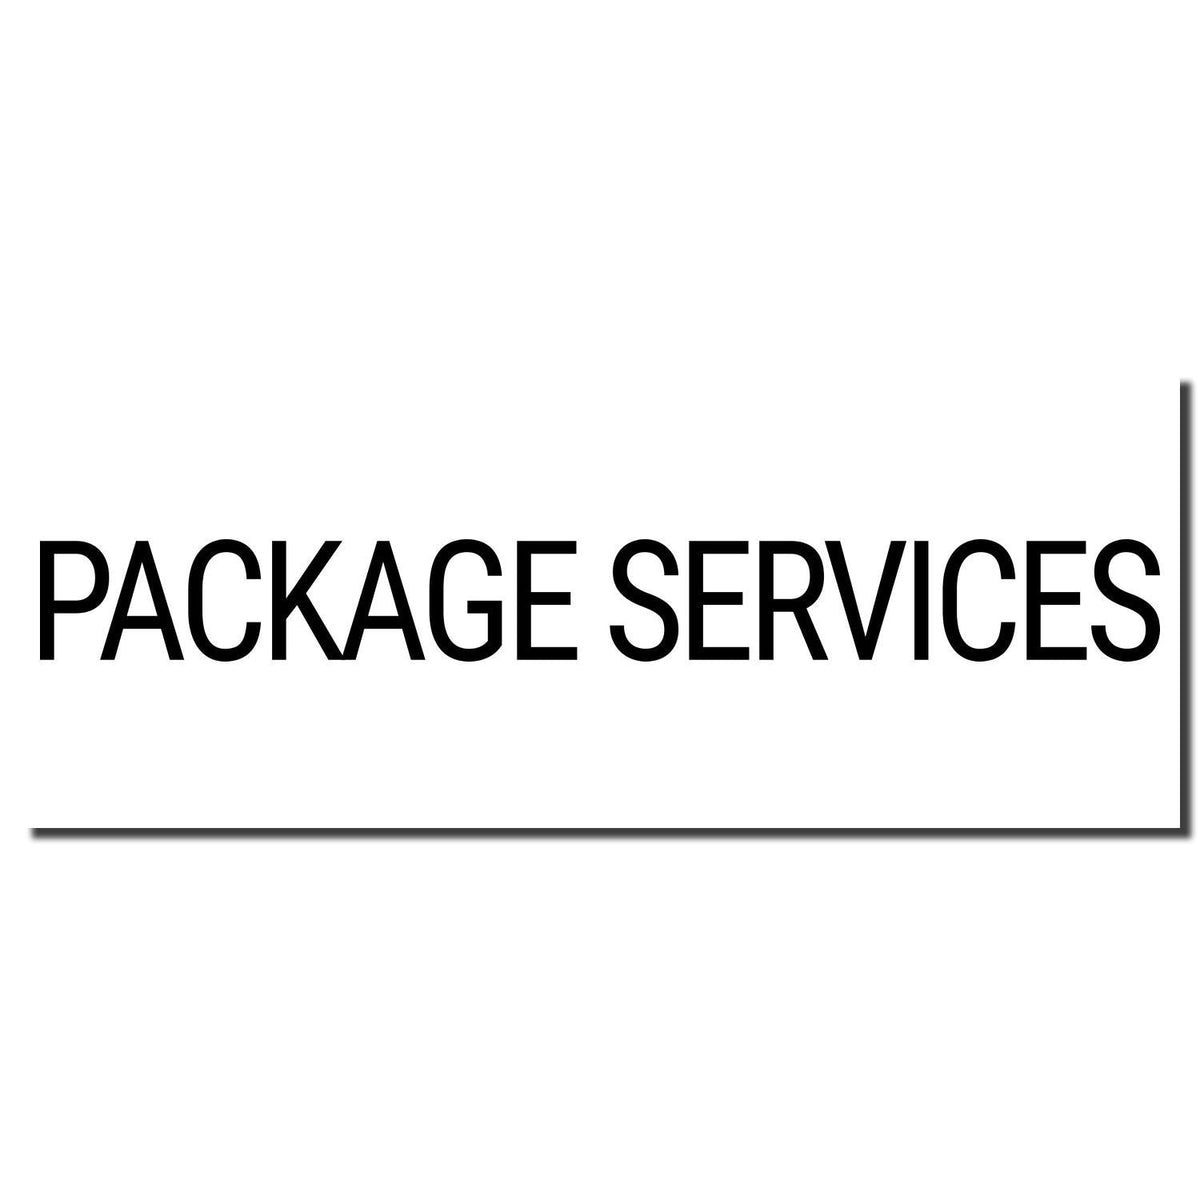 Enlarged Imprint Self-Inking Package Services Stamp Sample